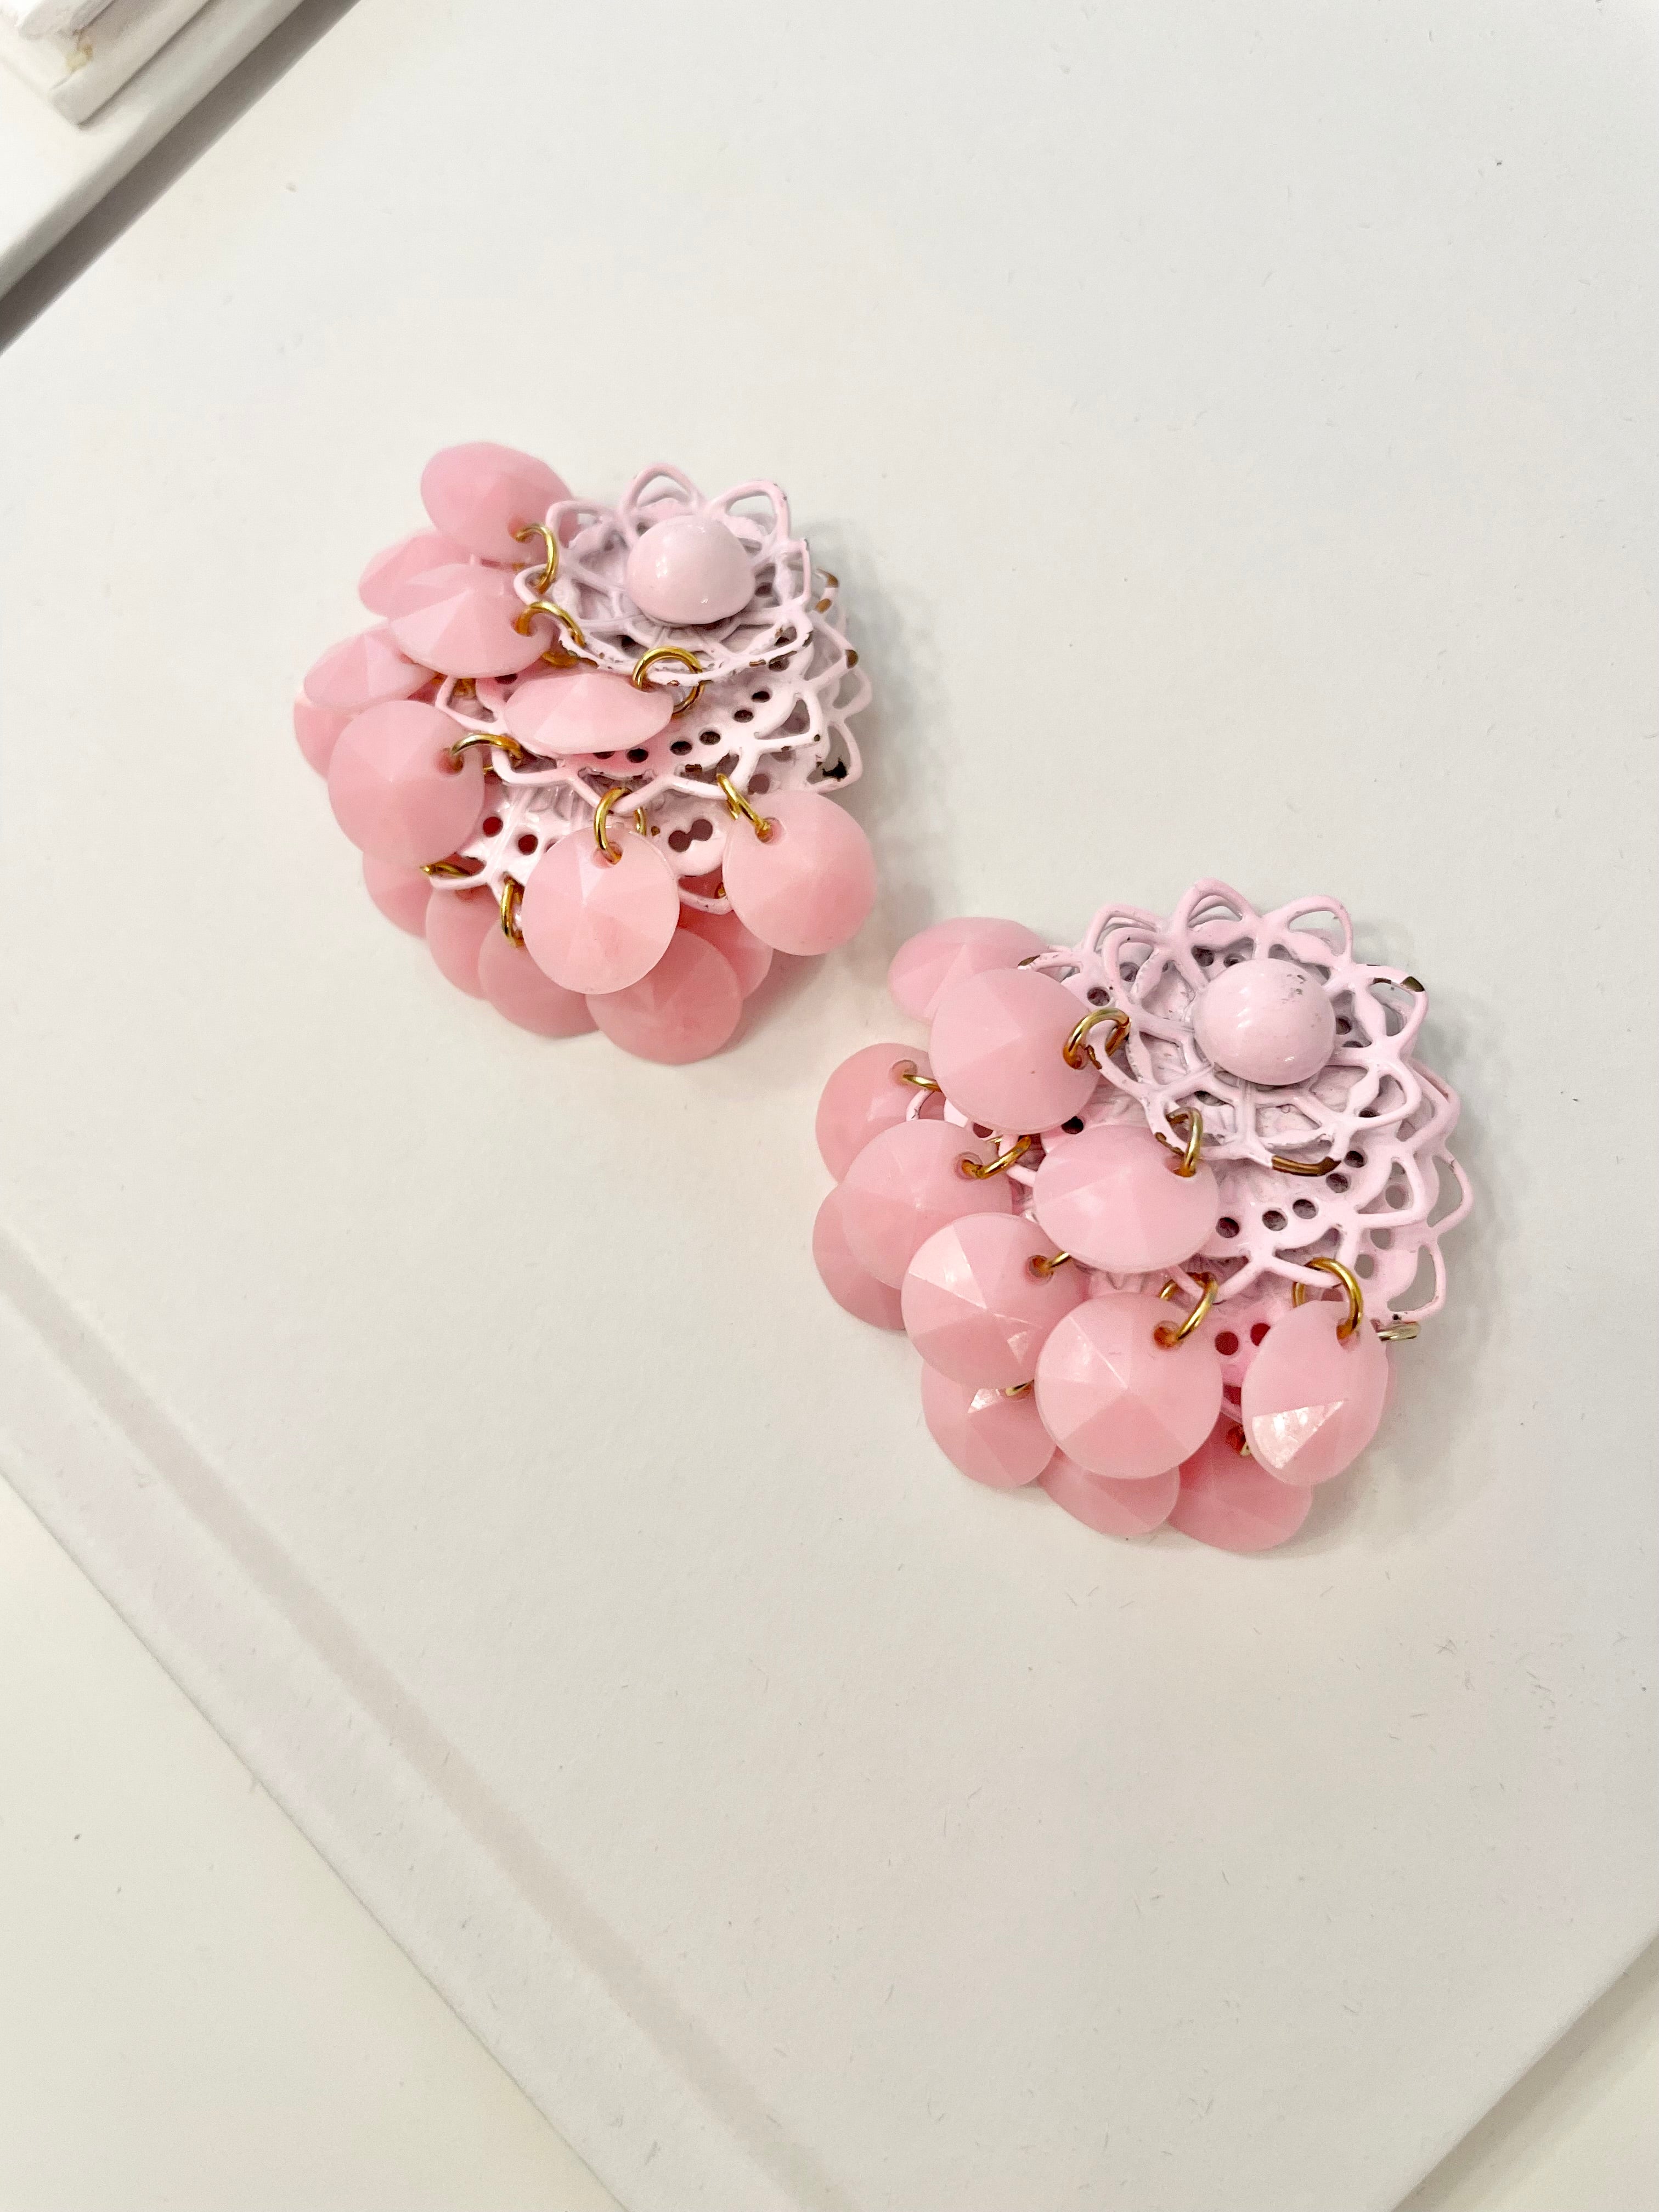 The Flirty gal and her pretty pink earrings! These are so feminine!